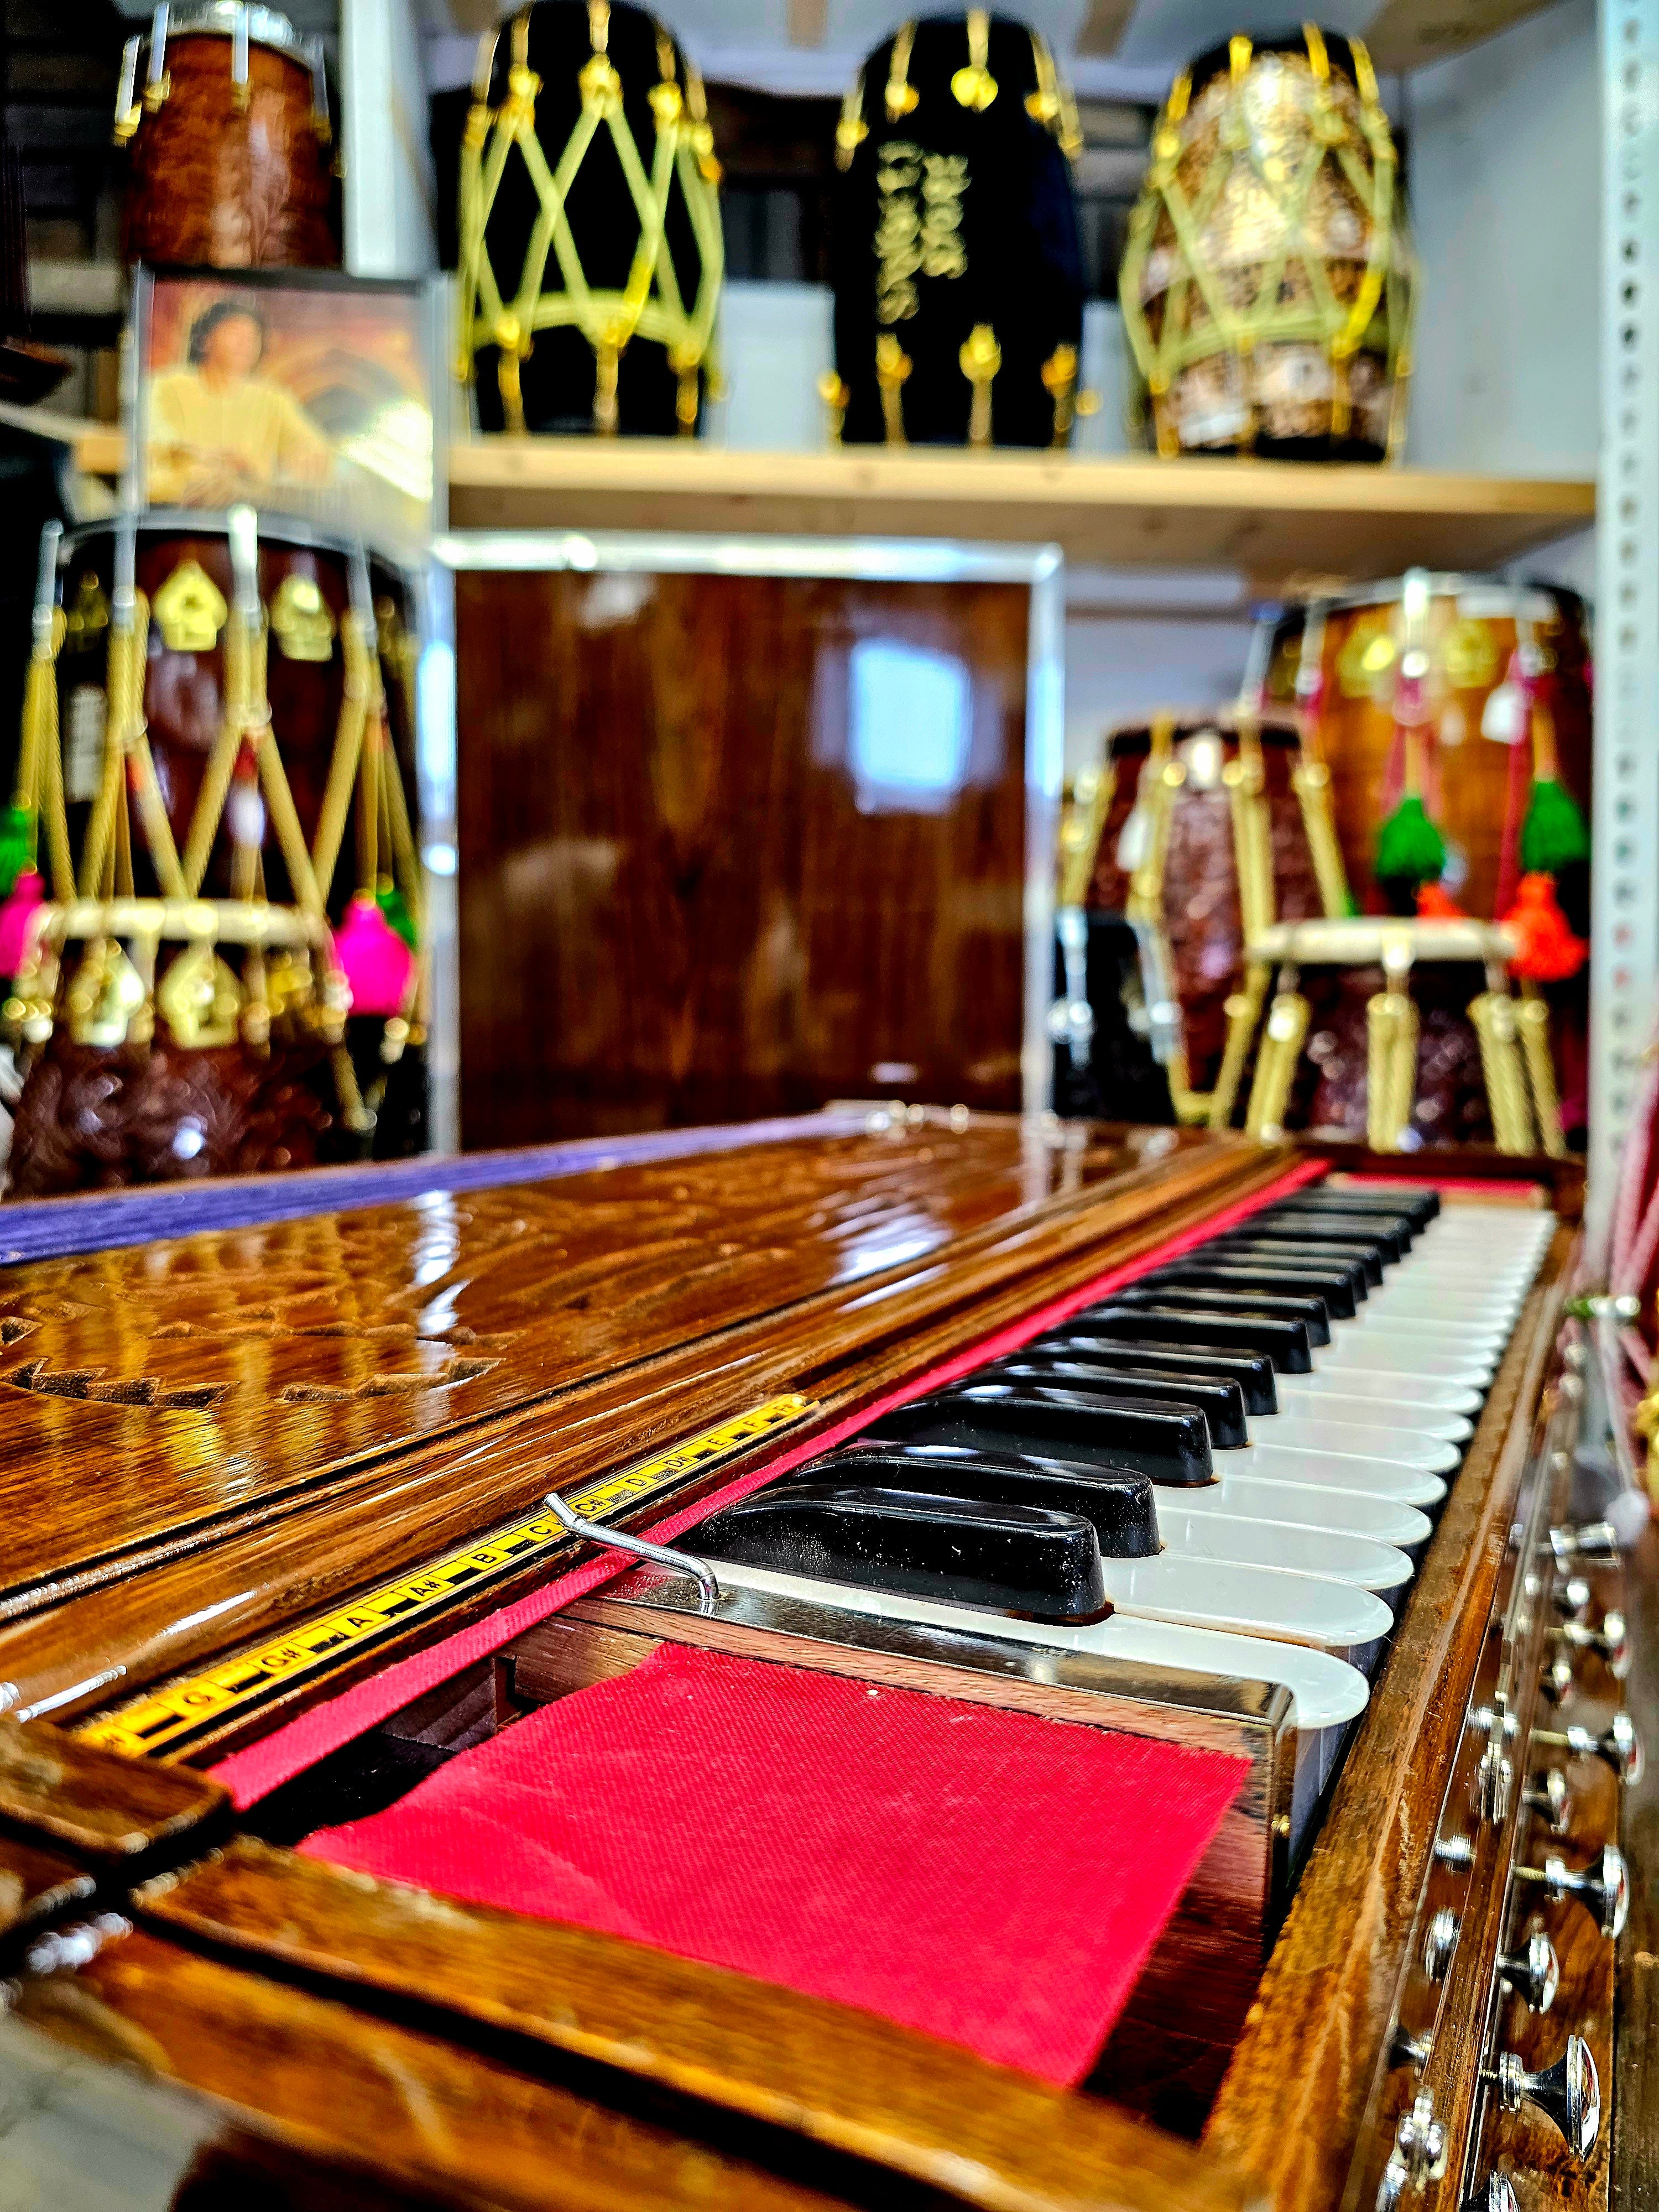 Harmonium Maestro: A 3 Reed, 13 Scale-Changer with Natural Glossy Wooden Finish (Price Includes Shipping to Trinidad)